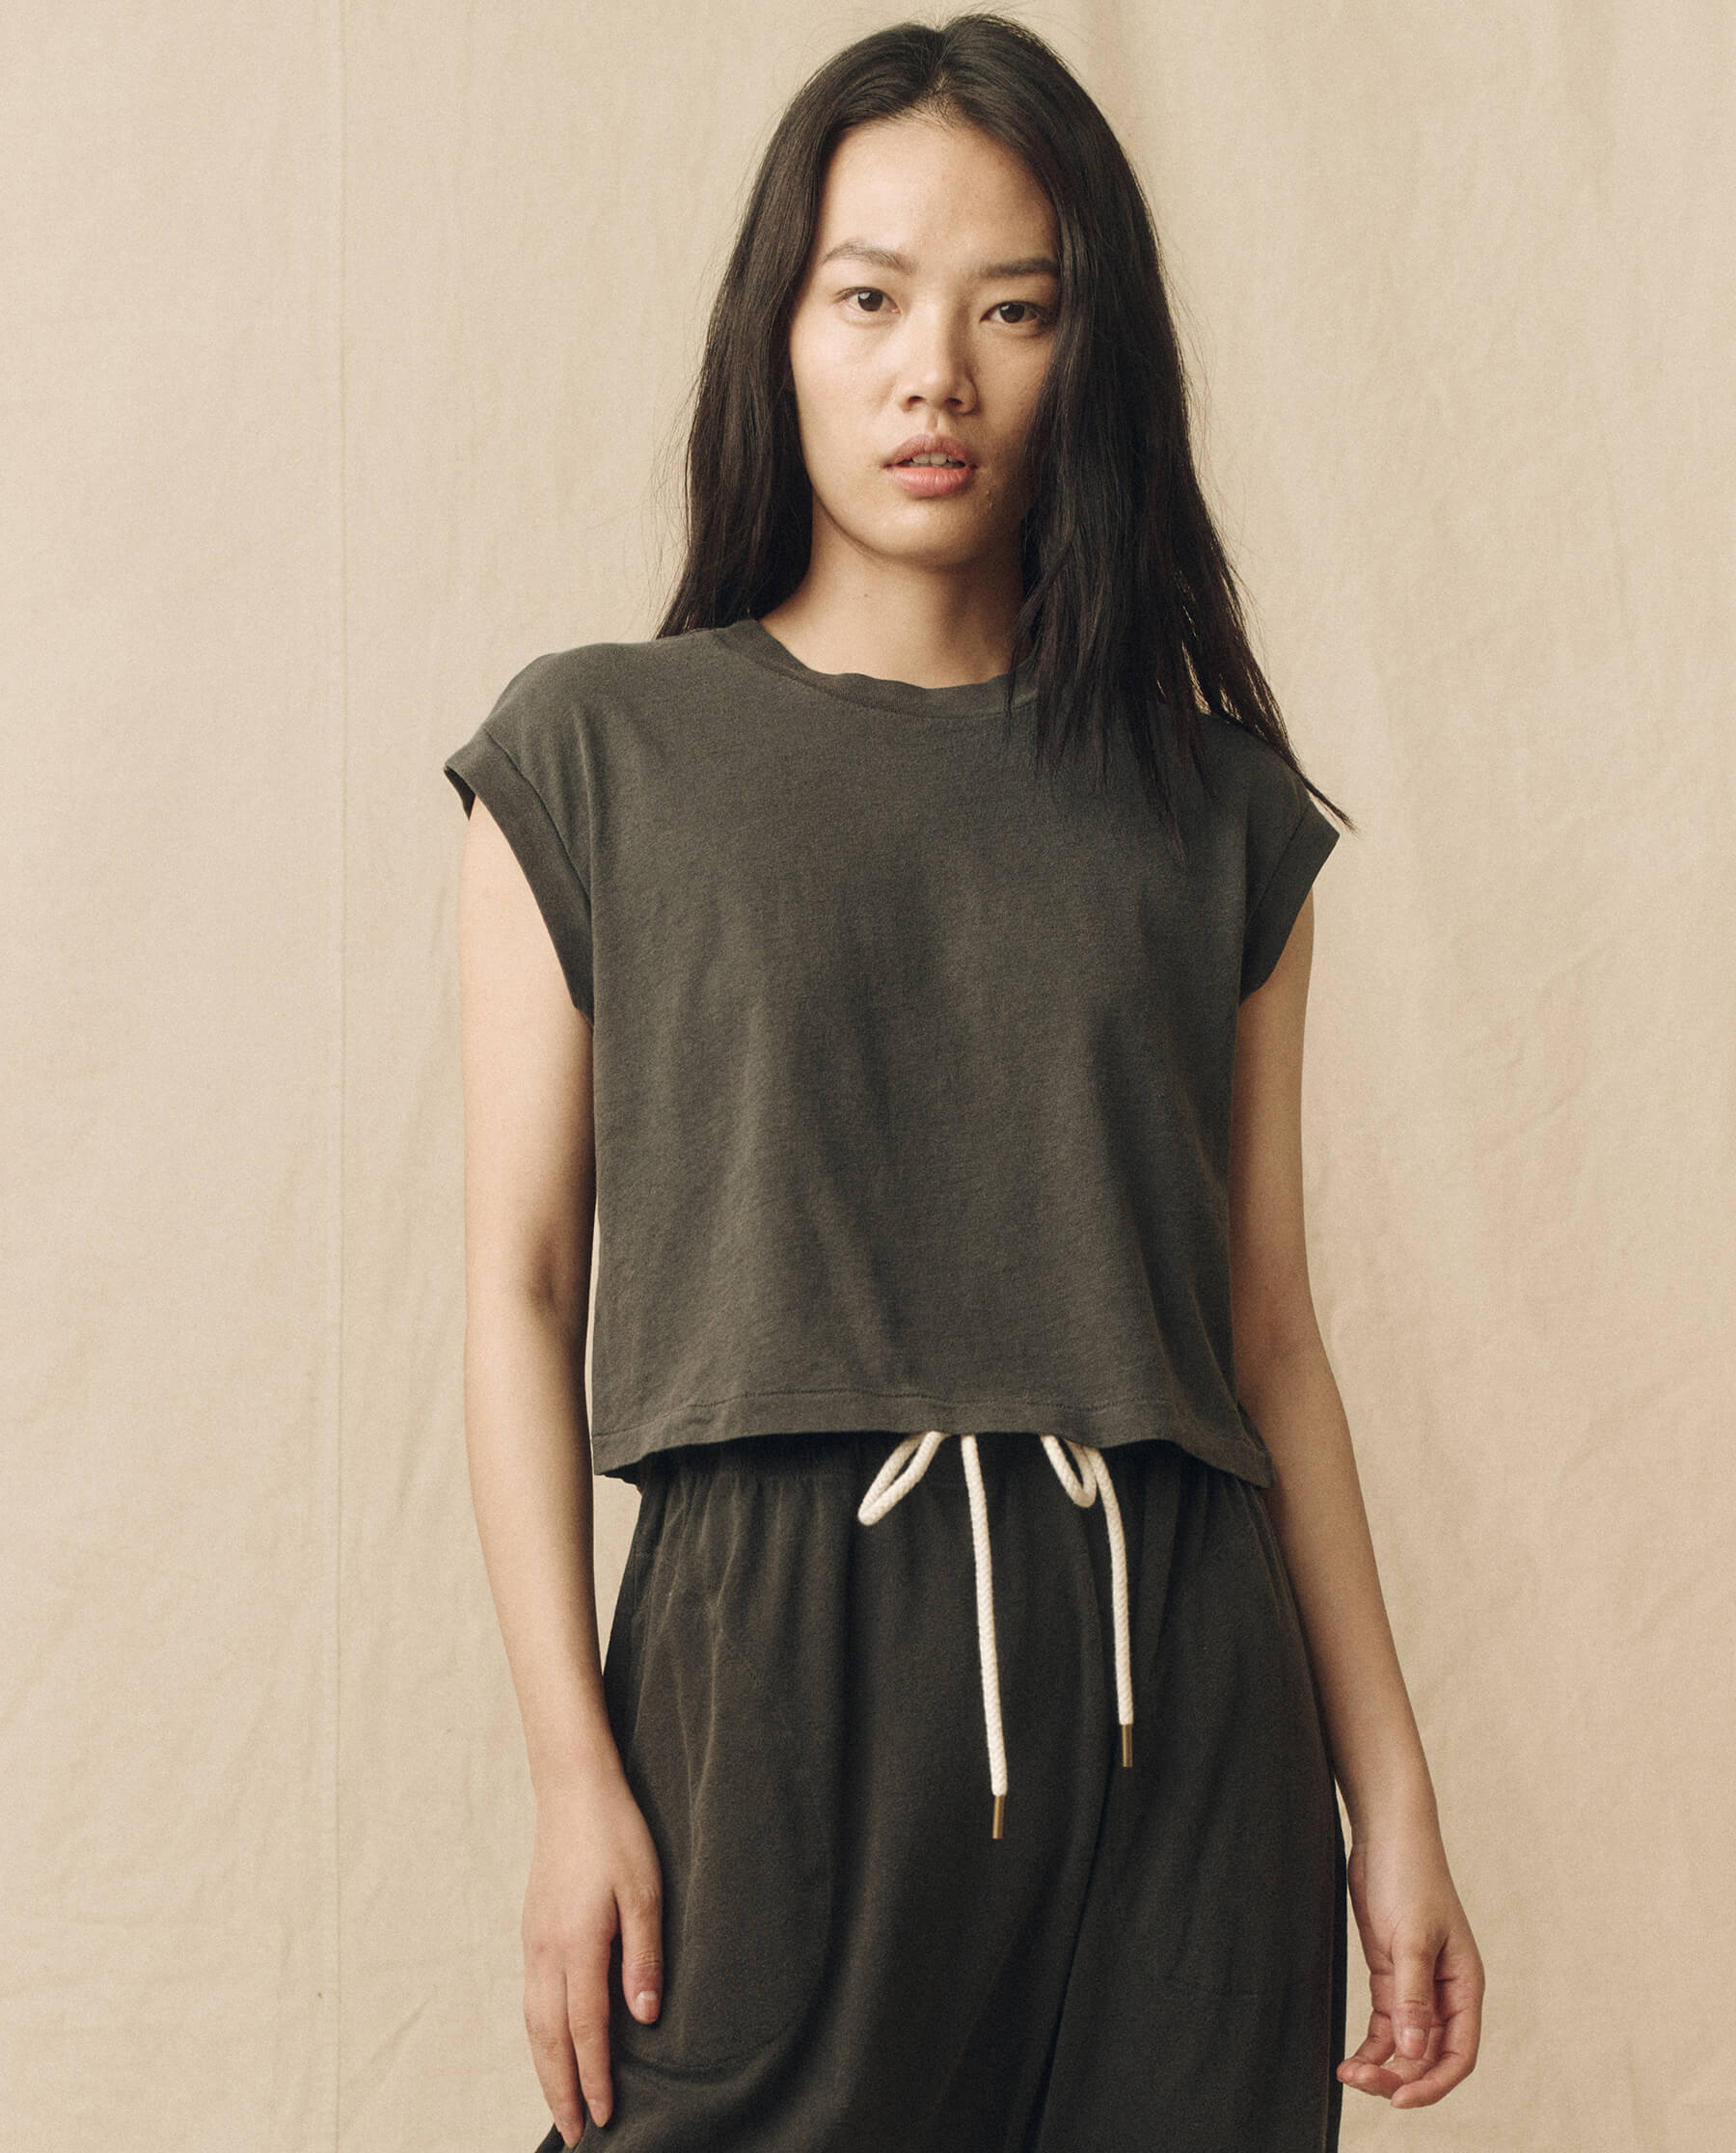 The Square Tee. -- Washed Black TEES THE GREAT. SU23 CORE KNITS